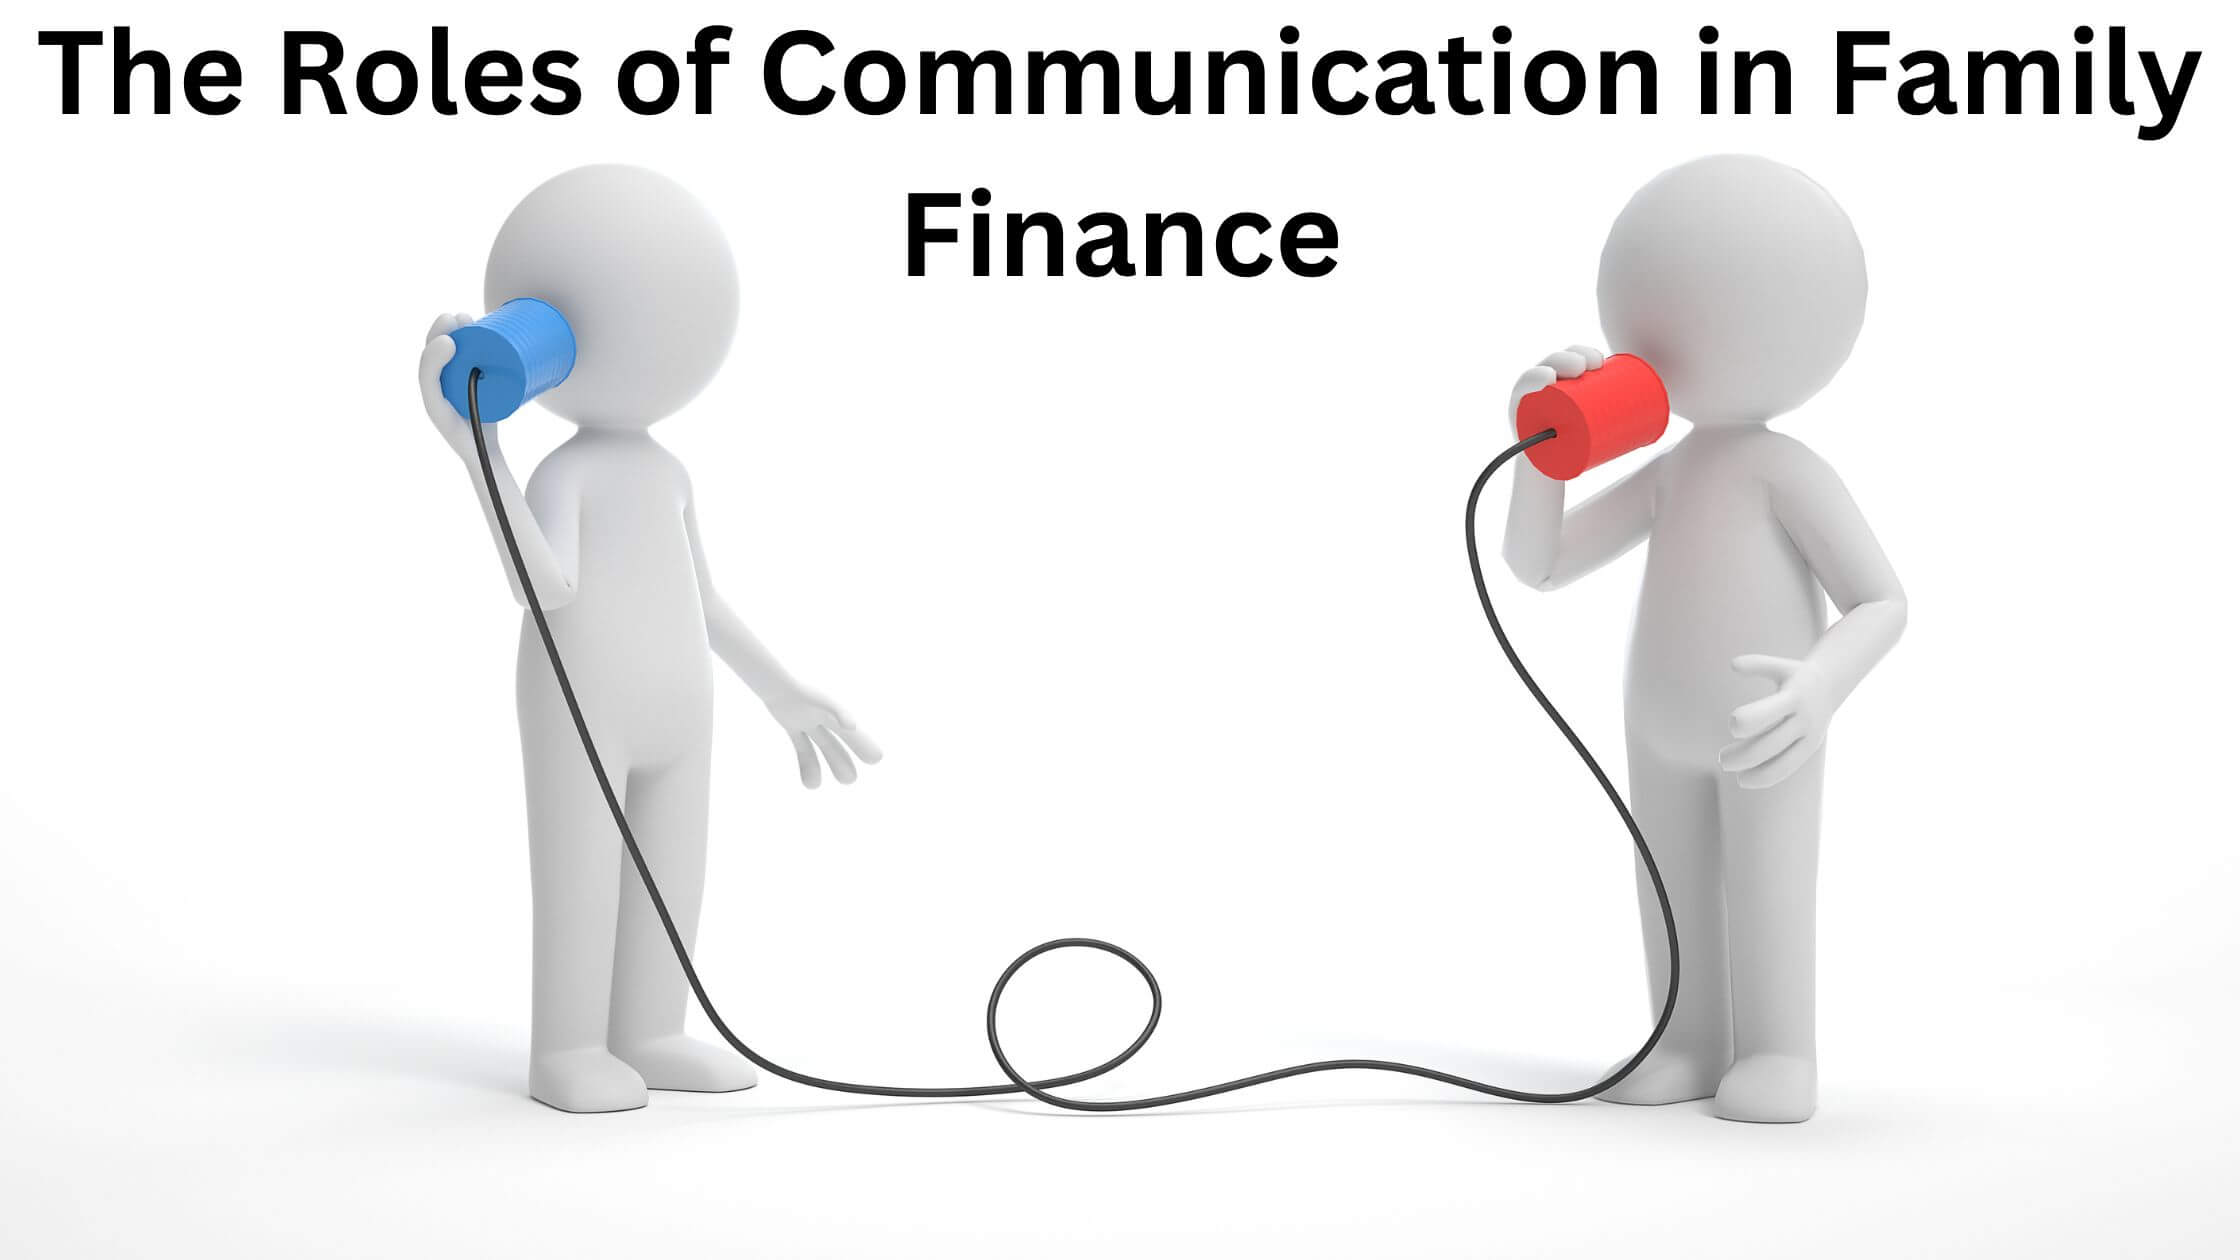 What are the roles of communication in family finance?